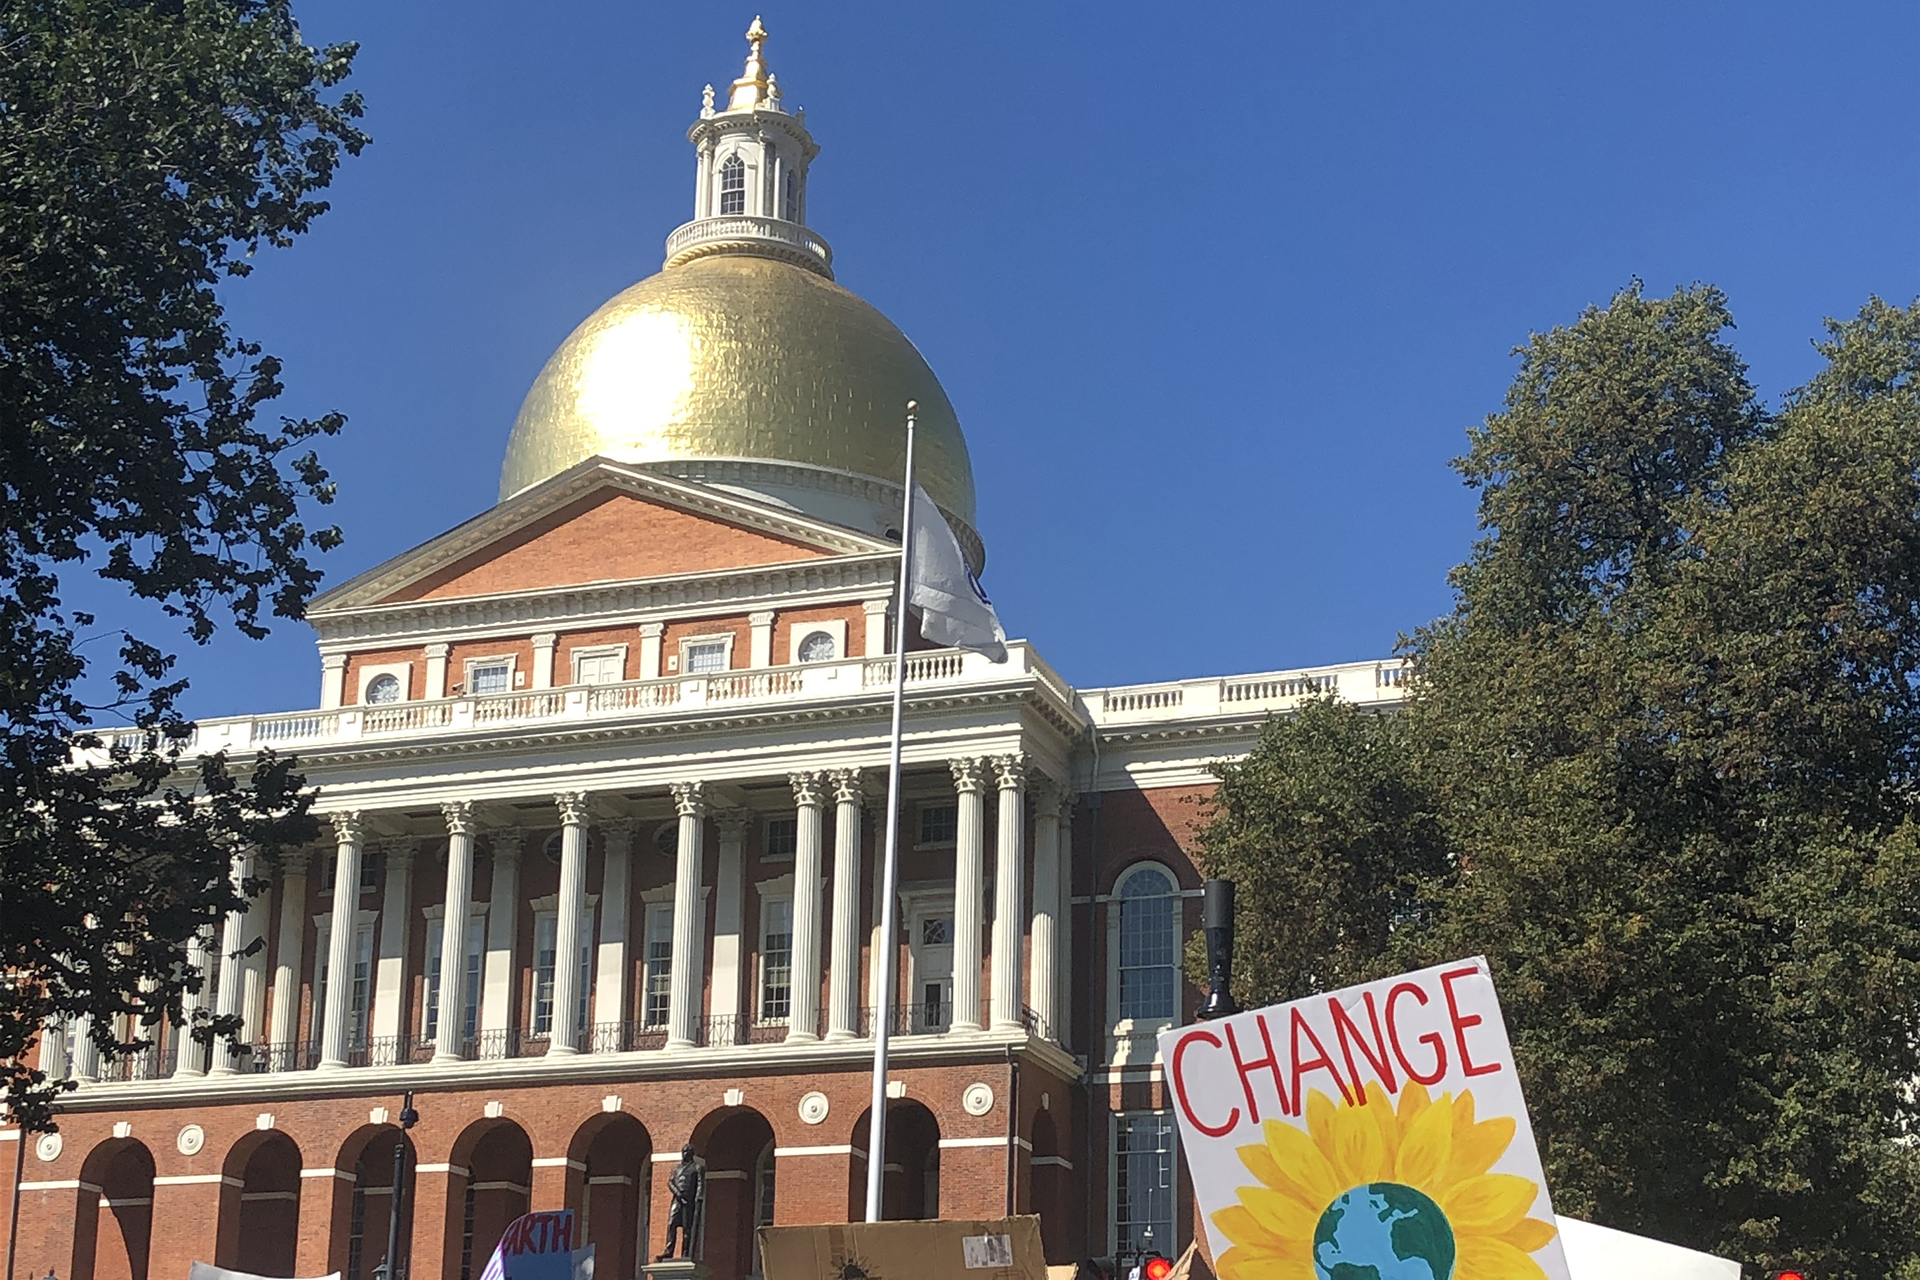 A sign reading "Change" held up in front of the Massachusetts State House